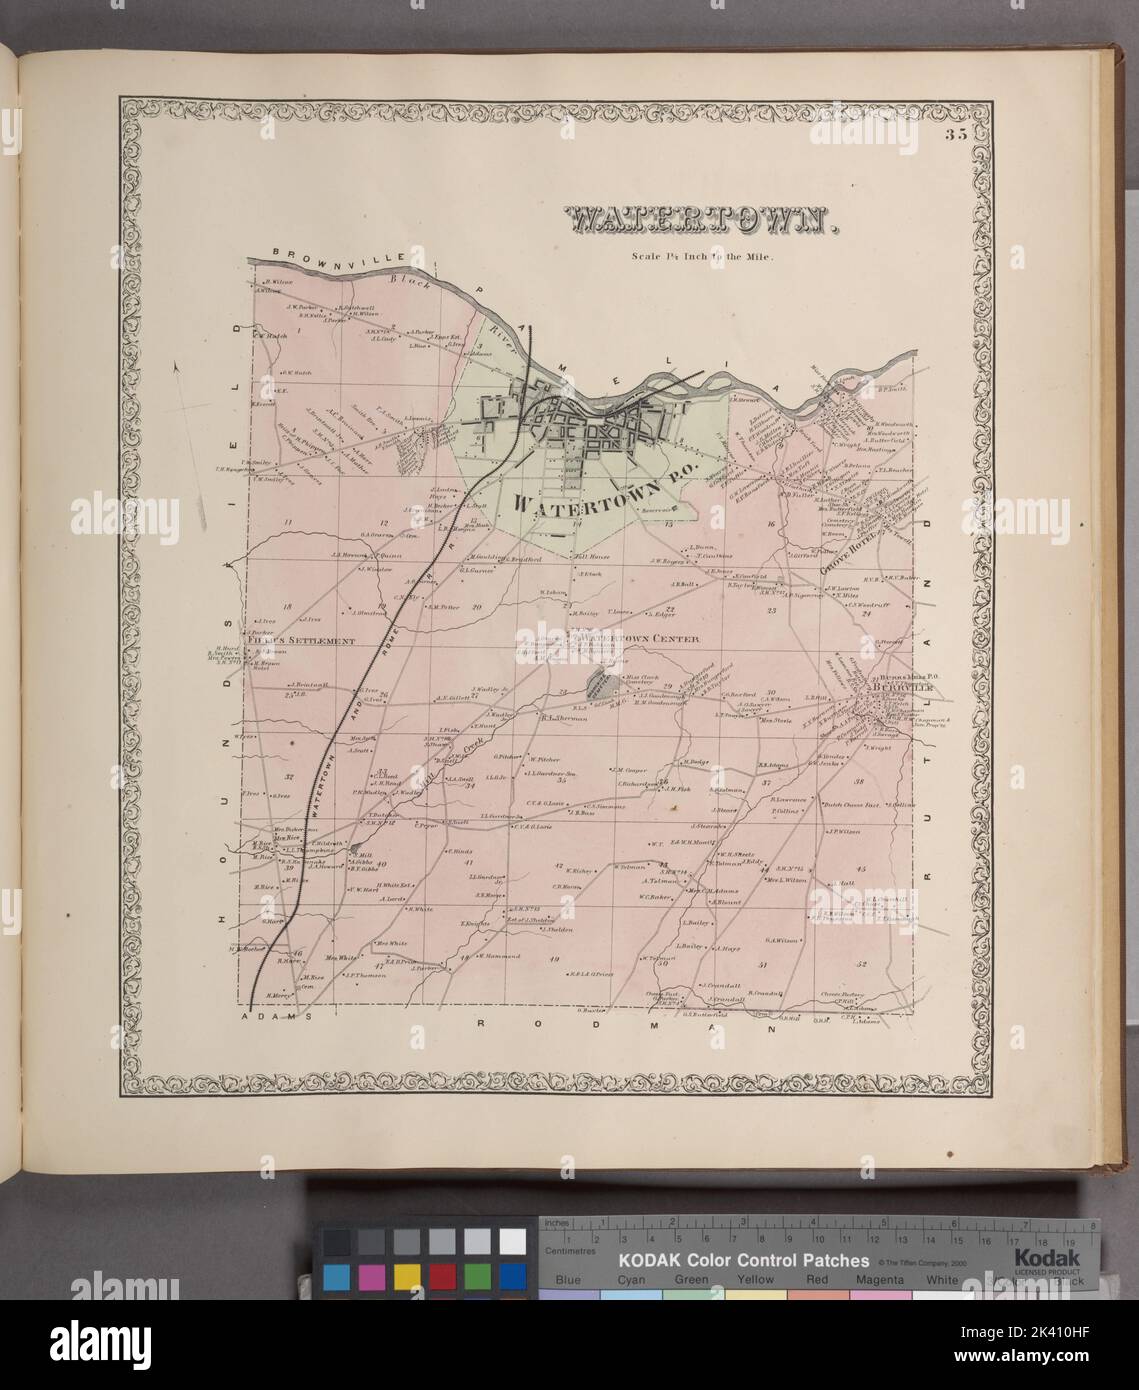 Watertown Township Cartographic Atlases Maps 1864 Lionel Pincus